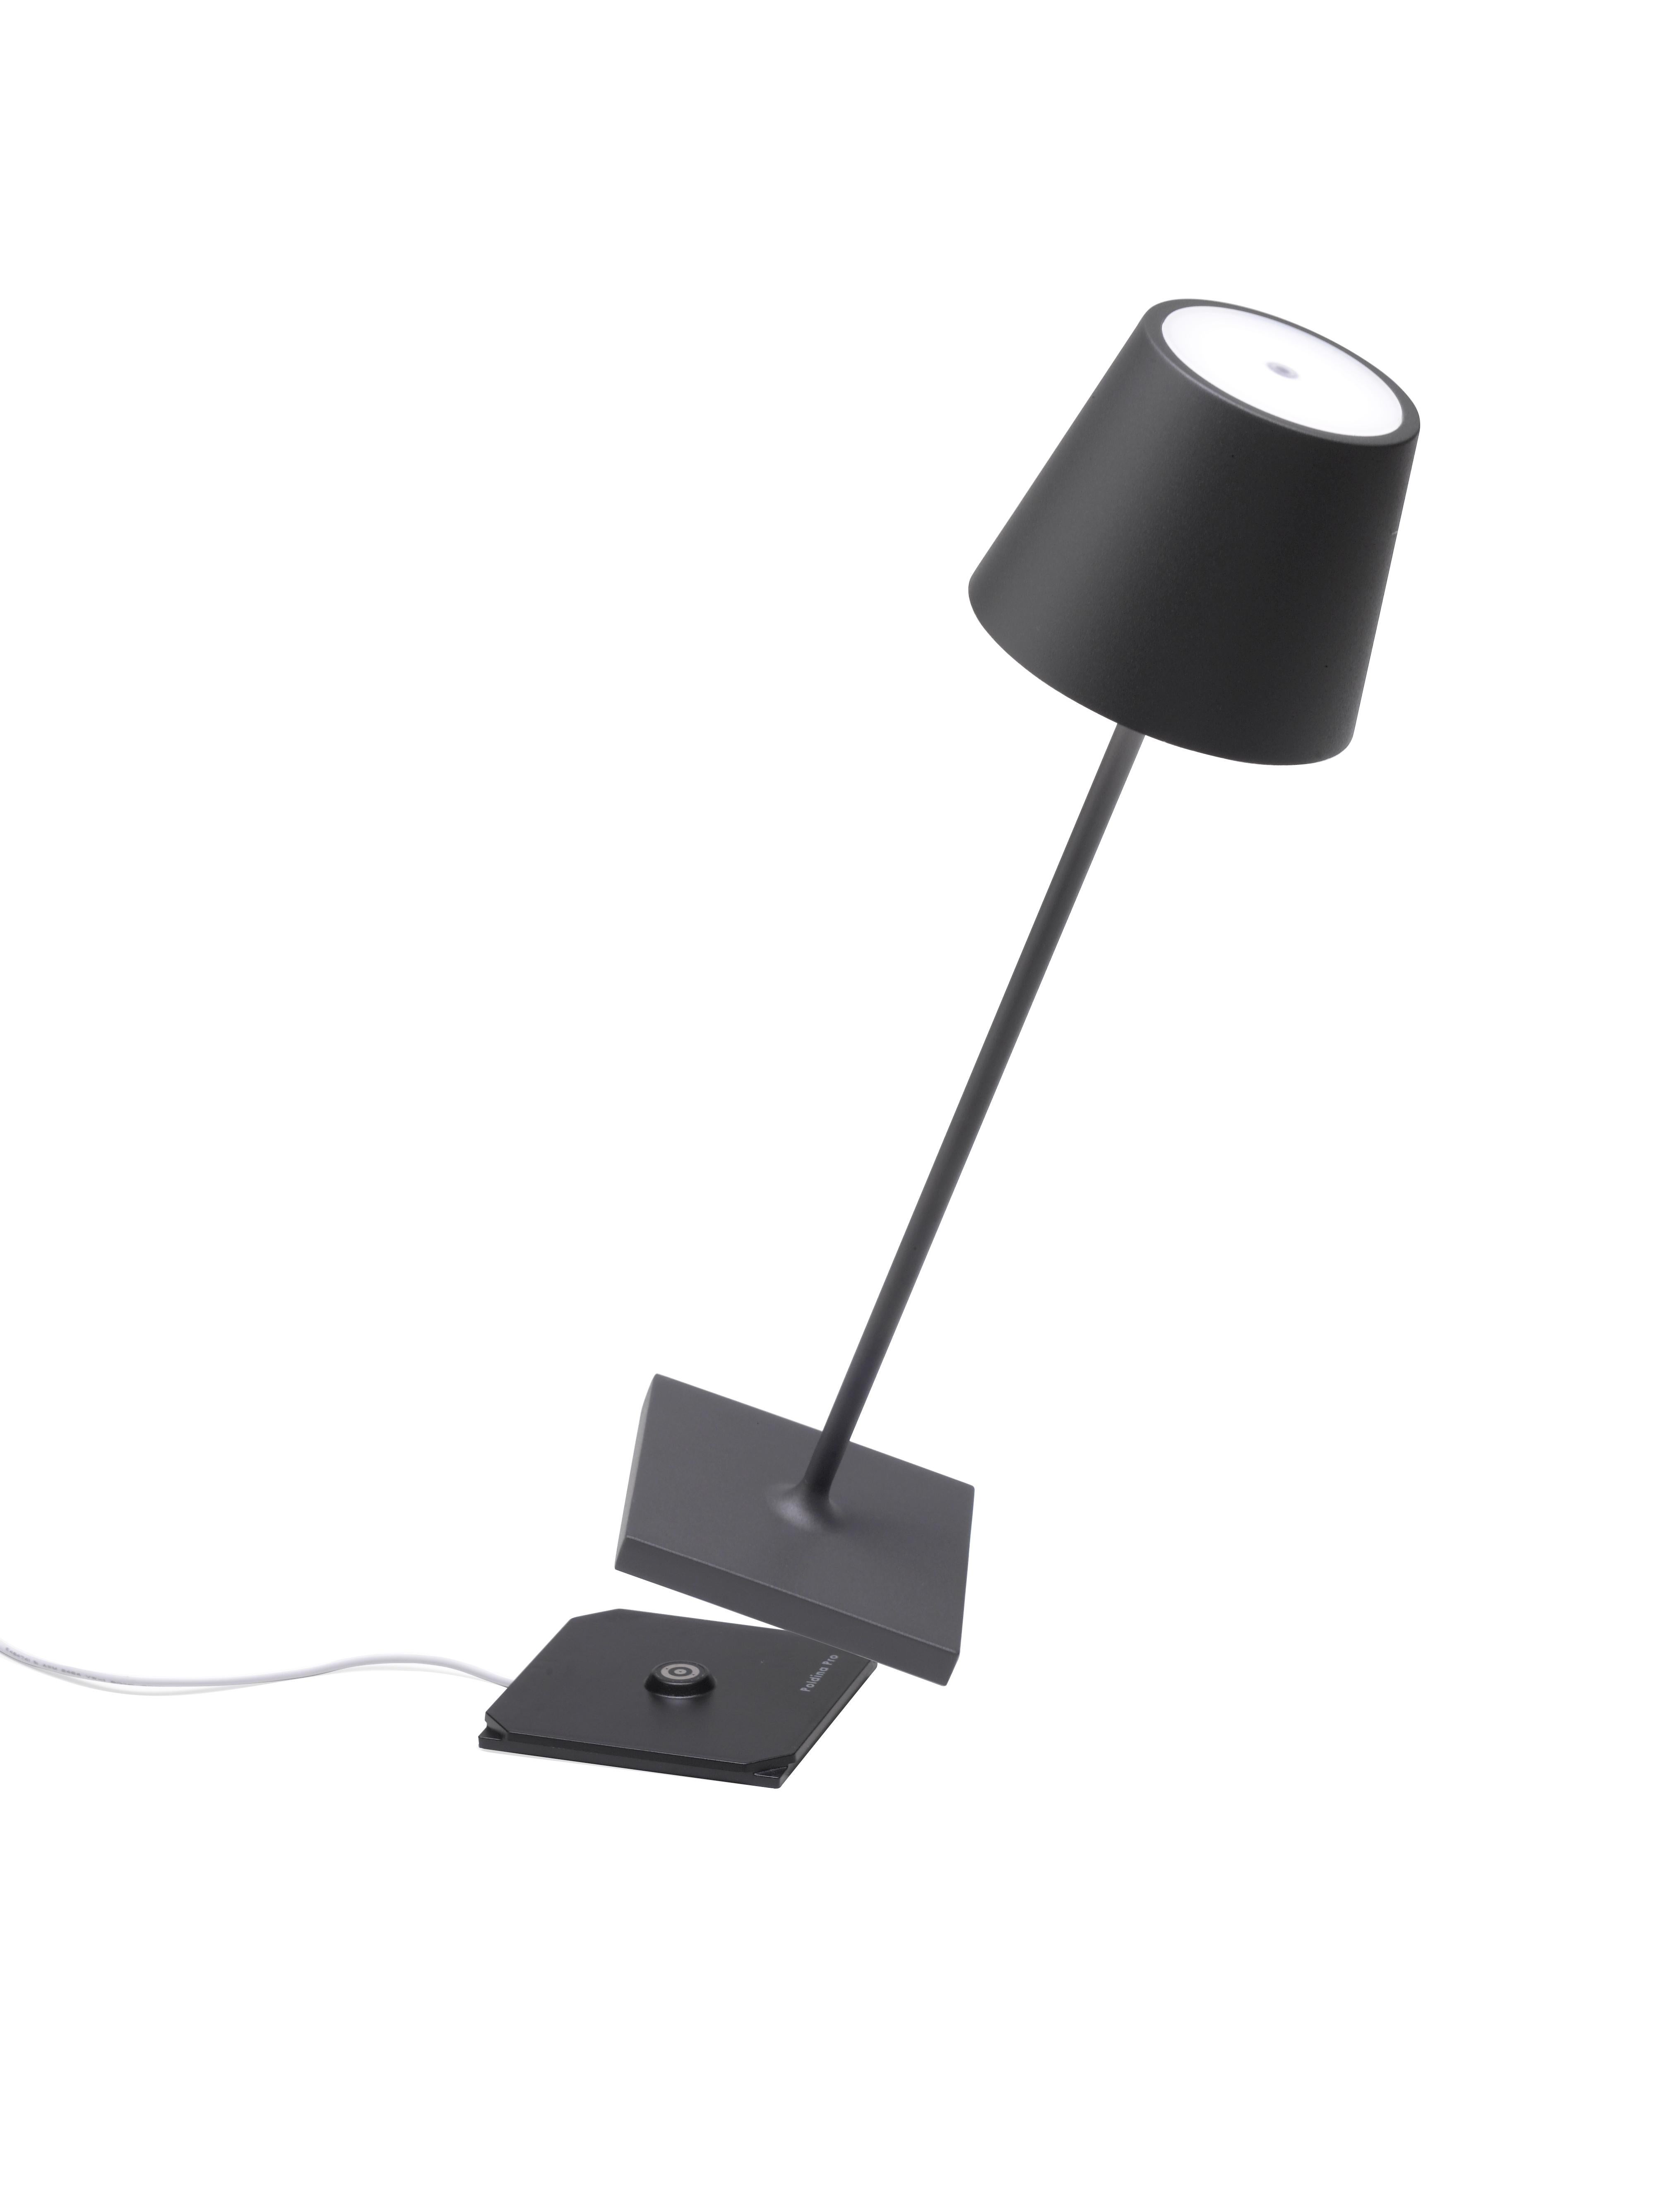 Light Where You Want It! The Poldina Pro table lamp is cordless, rechargeable, dimmable and provides 9+ hours of cordless illumination. Read below for many of the lamps other attributes and features that make it the best selling cordless lamp on the